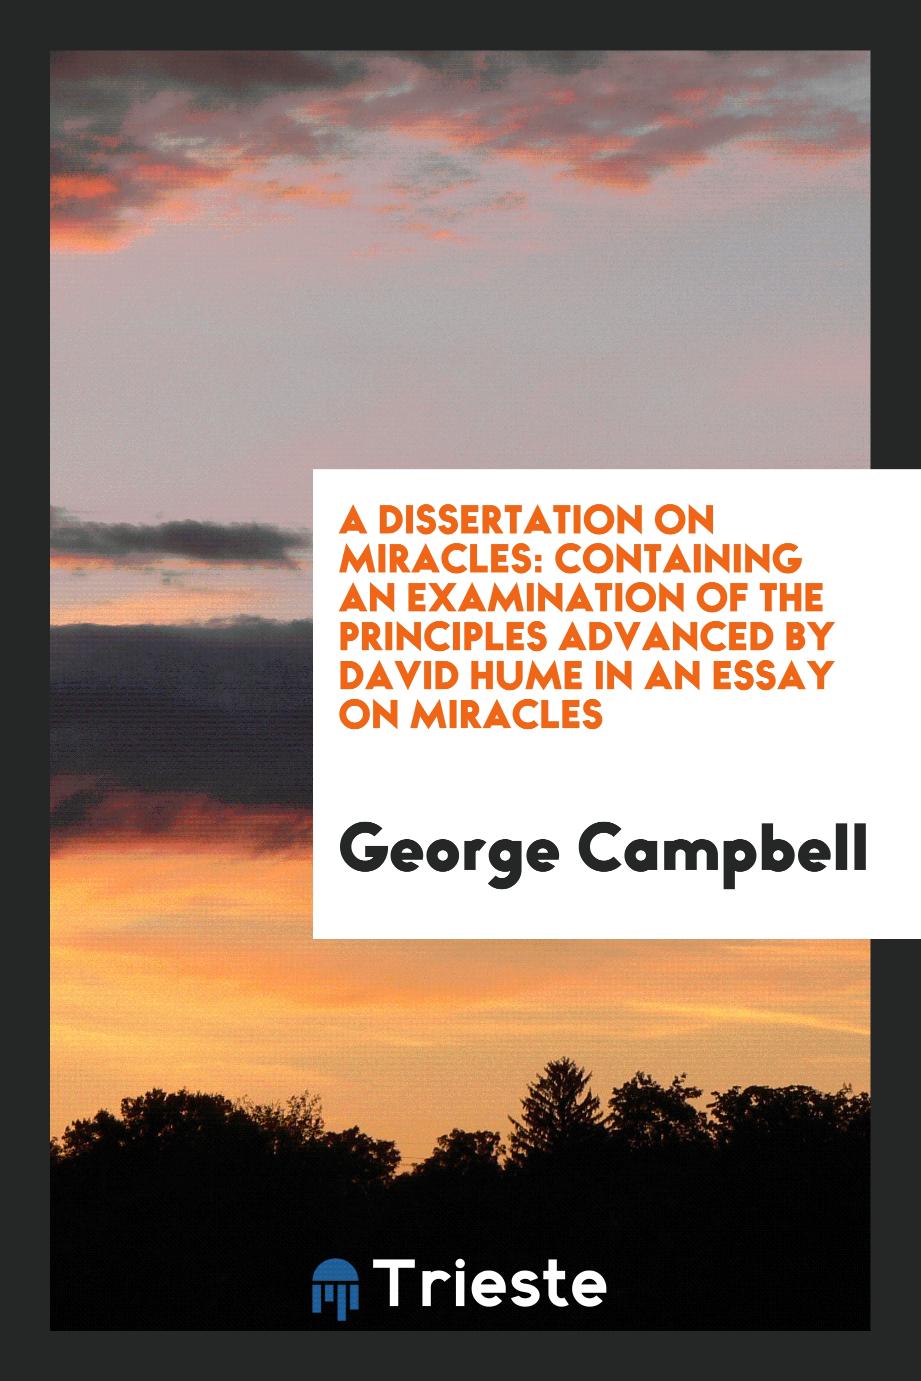 George Campbell - A Dissertation on Miracles: Containing an Examination of the Principles Advanced by David Hume in an Essay on Miracles